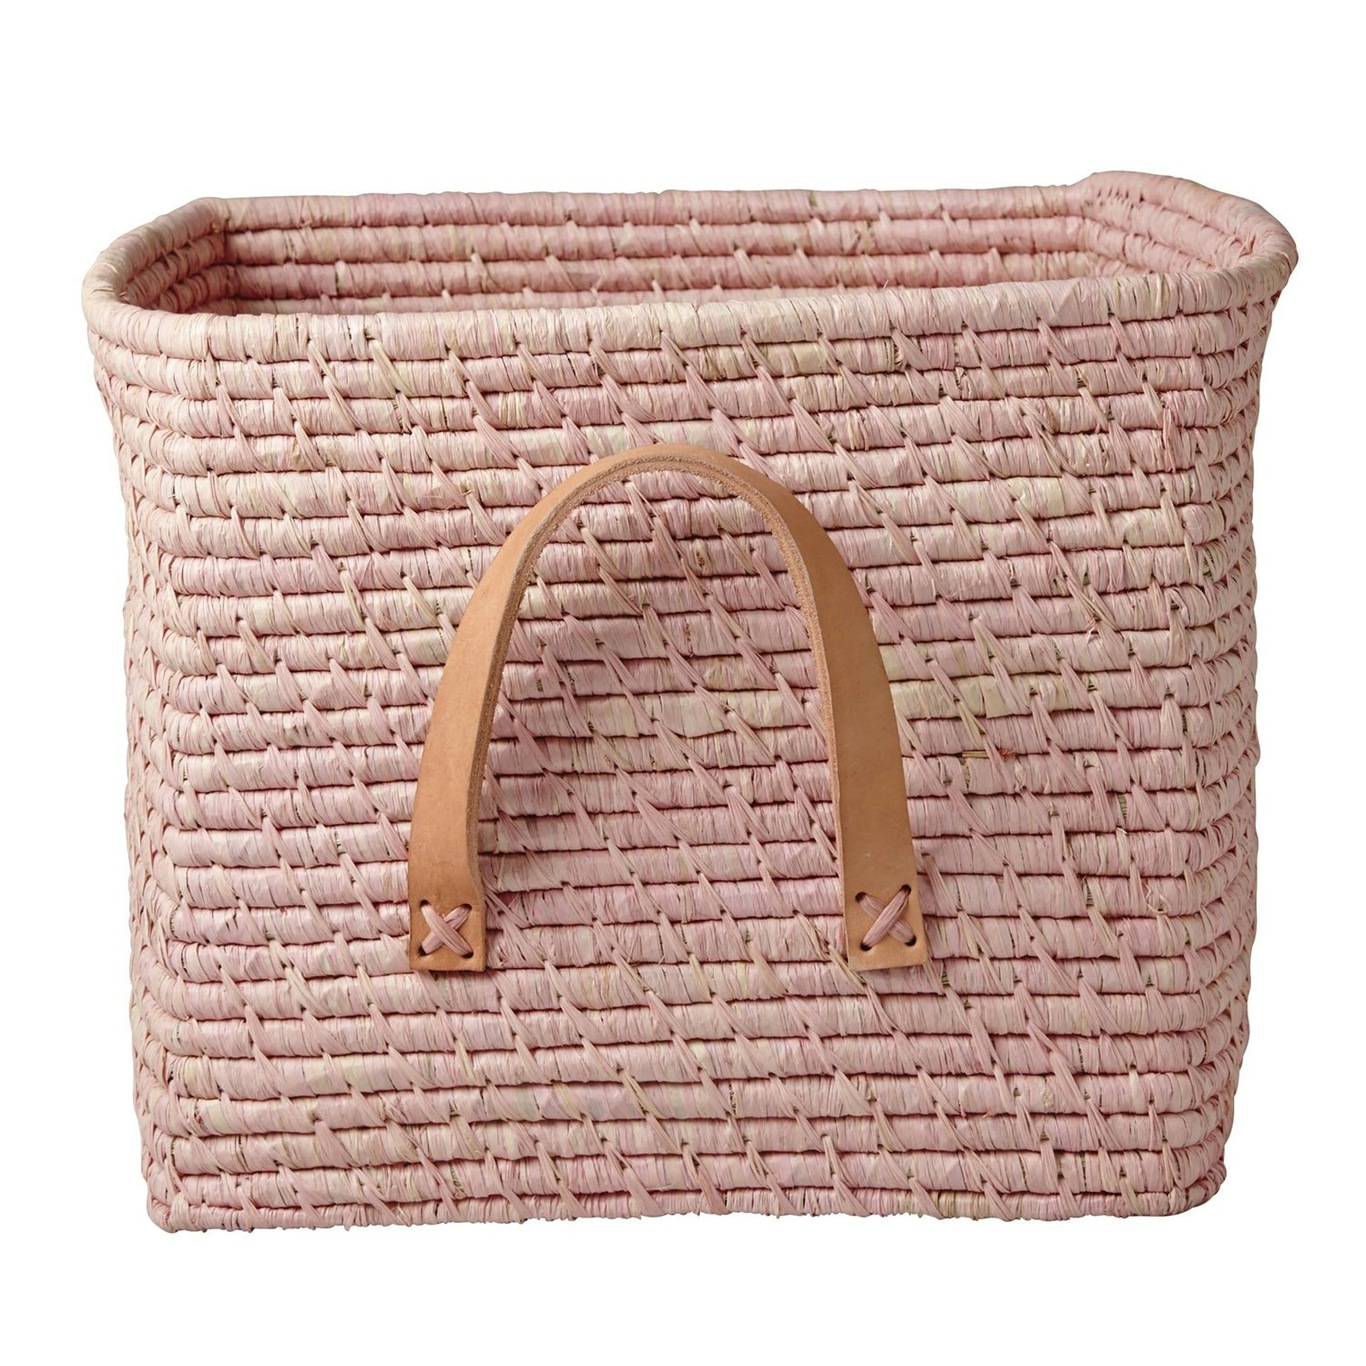 Basket with Leather Handles, Light Pink